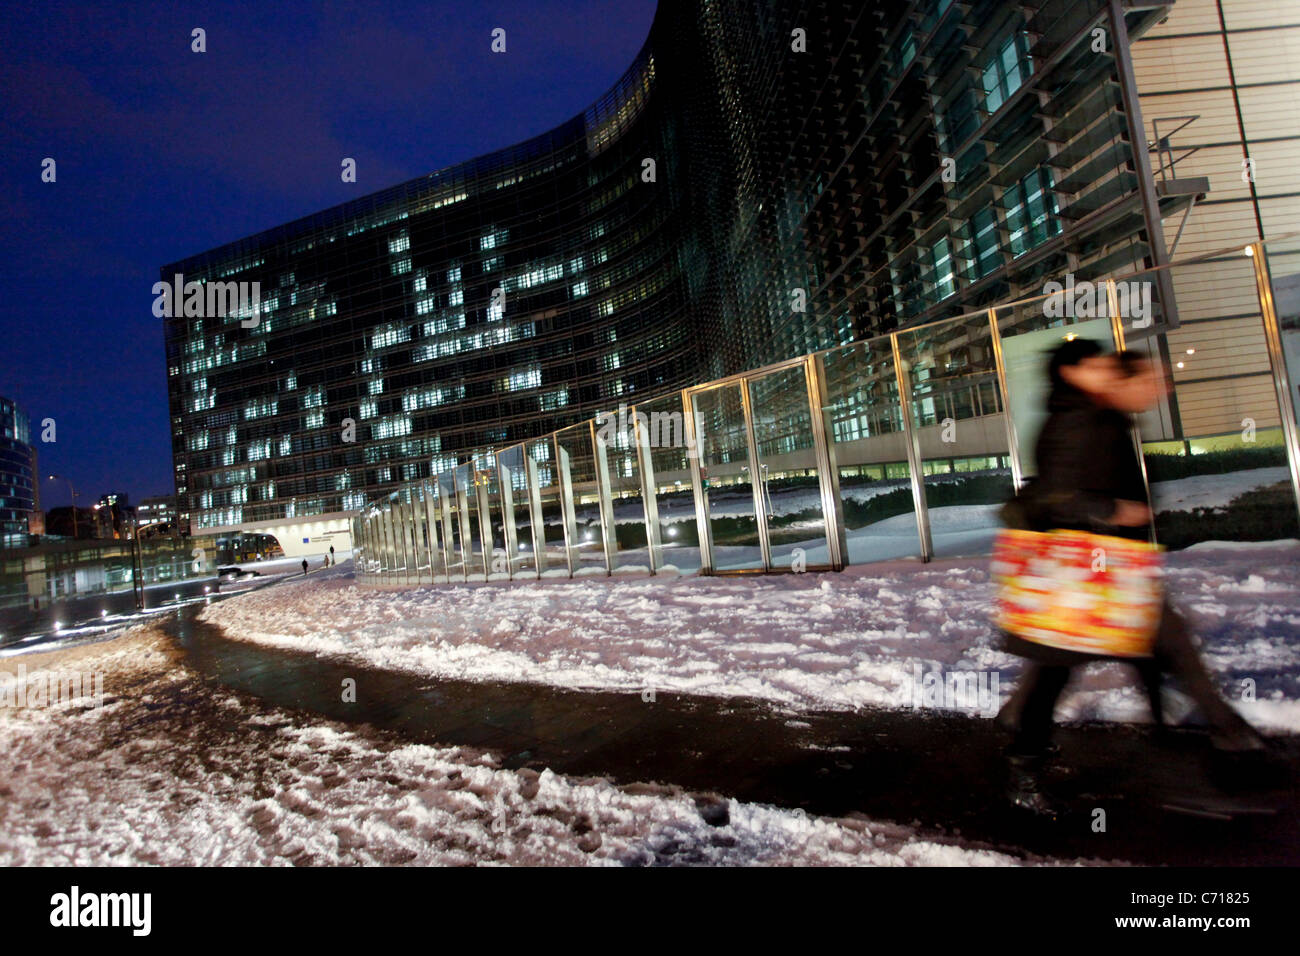 European Commission's headquarters pictured at night and covered by snow Stock Photo